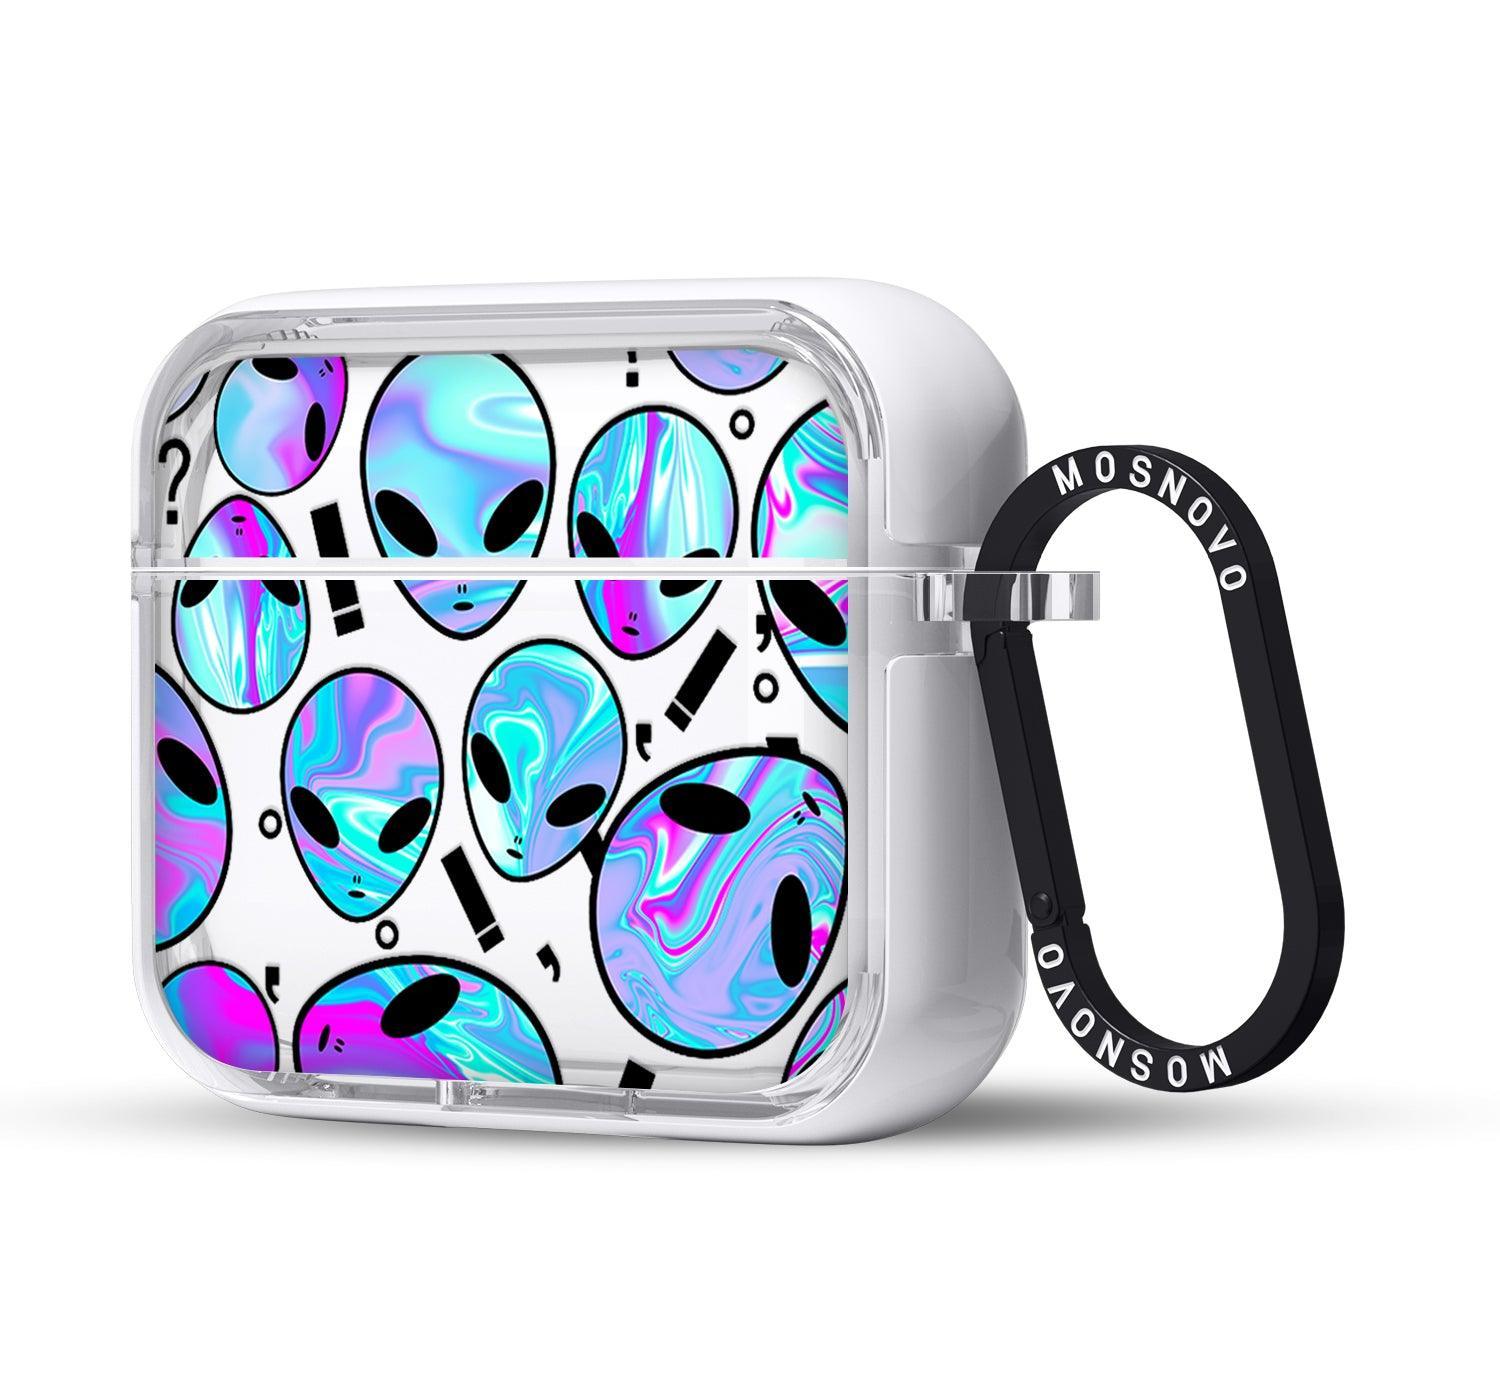 Alien AirPods 3 Case (3rd Generation) - MOSNOVO